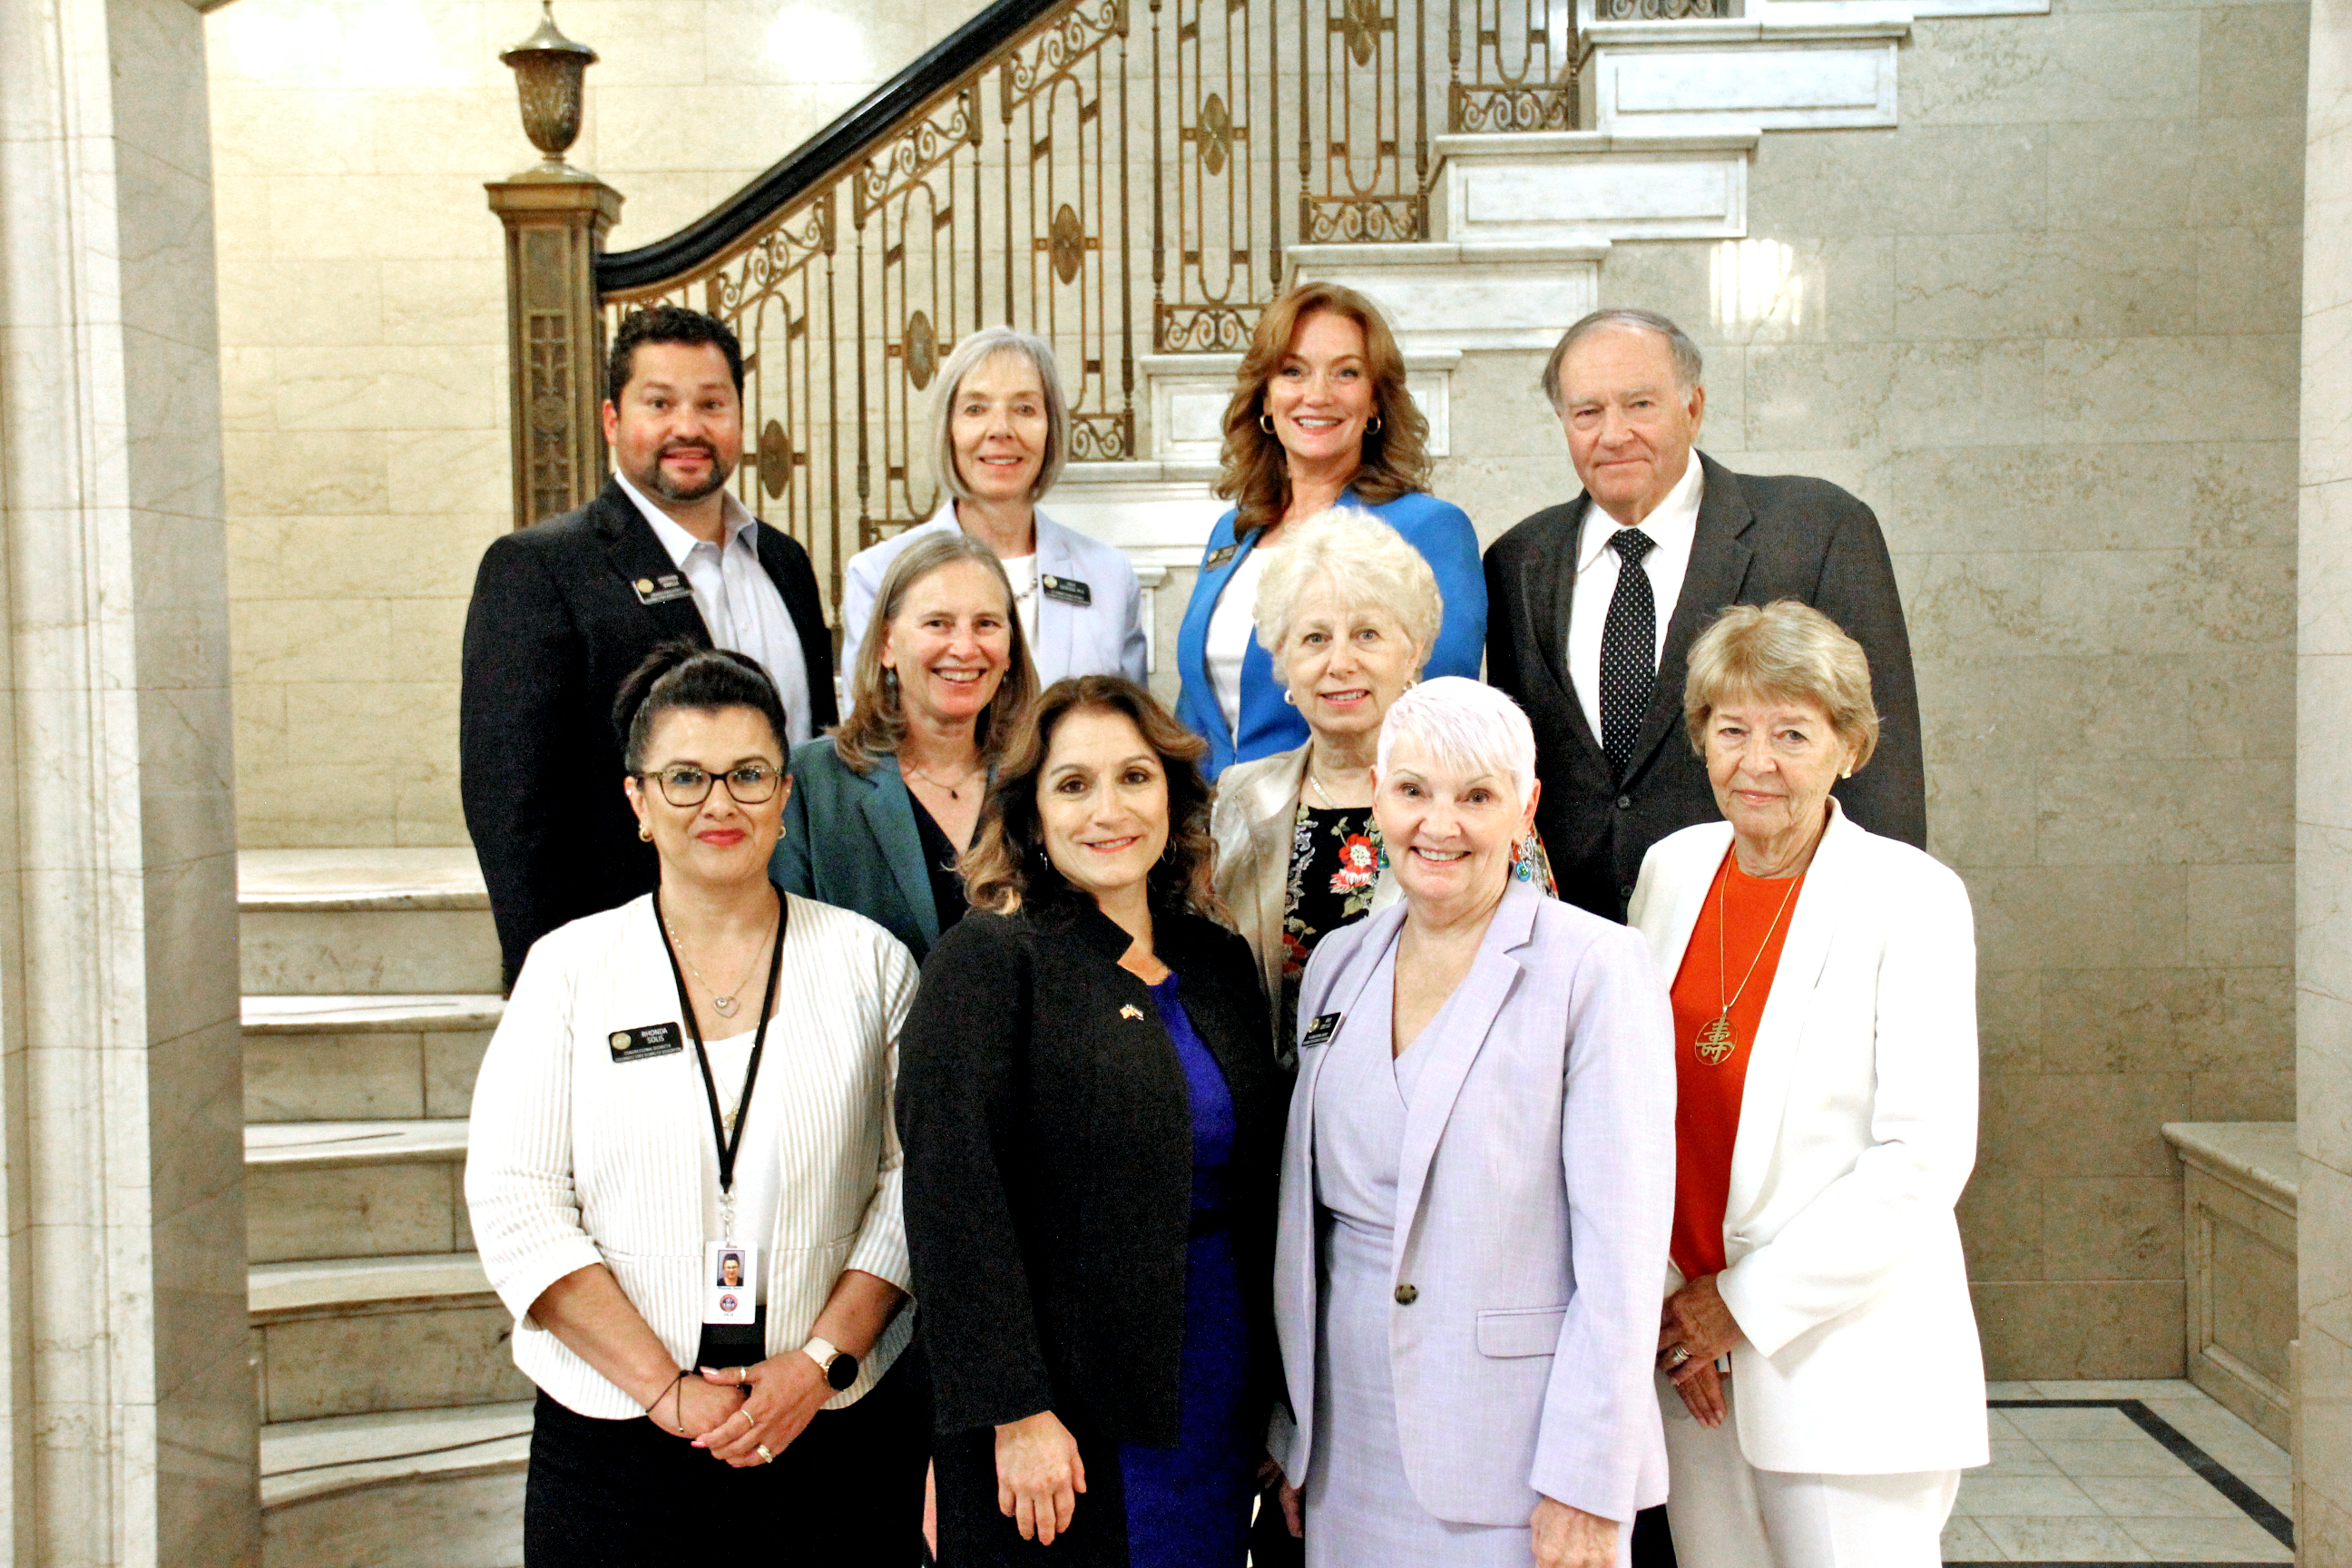 Group photo with State Board of Education members and Commissioner Susana Cordova. Taken in lobby of Colorado Department of Education 201 E Colfax building on Wednesday, June 14th, 2023.